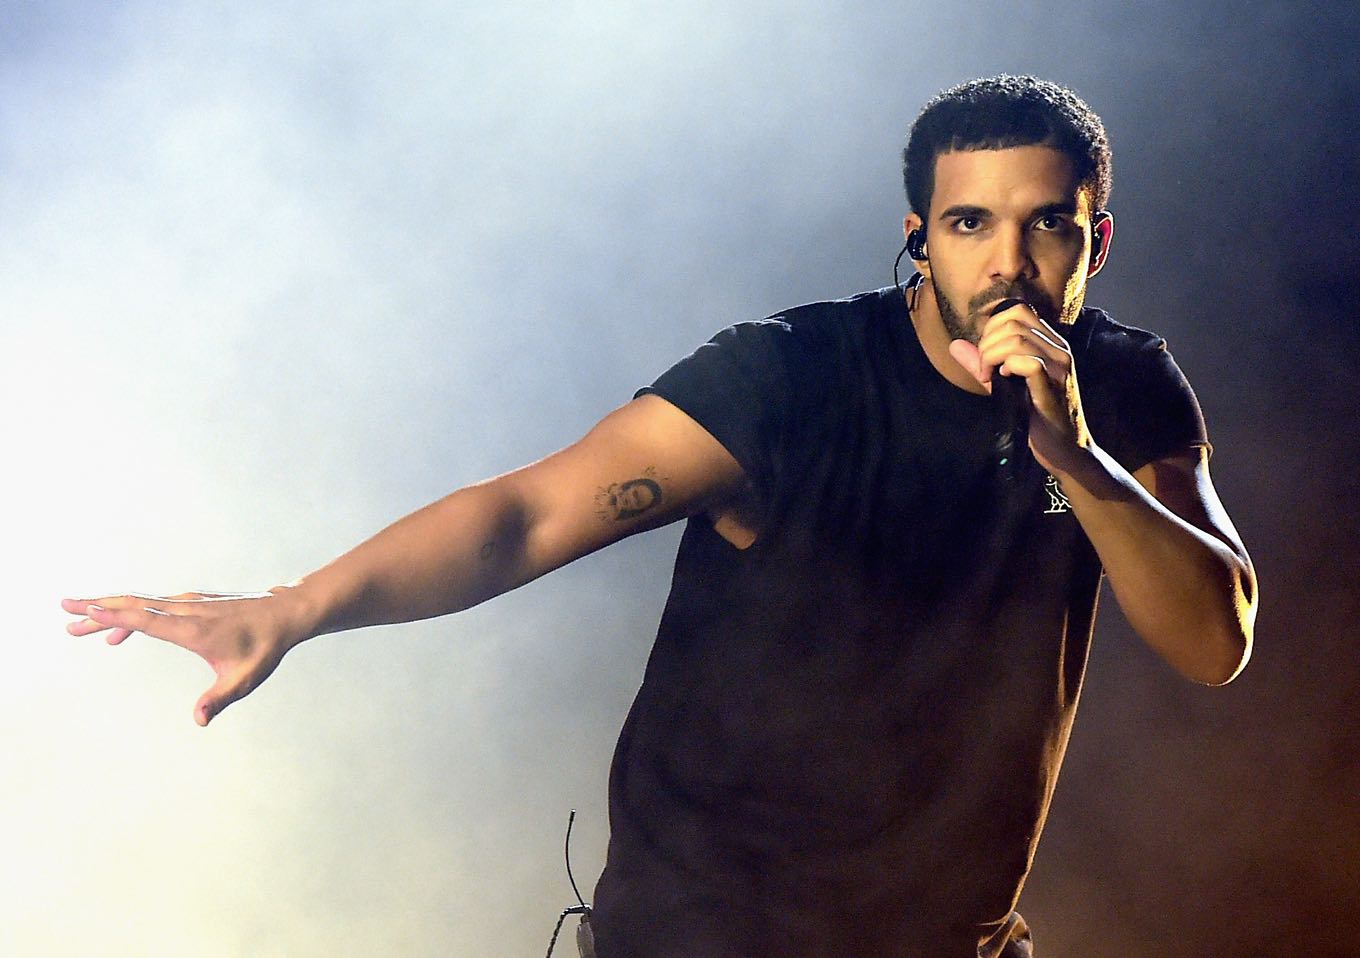 Drake performs onstage during day 3 of the 2015 Coachella Valley Music & Arts Festival (Weekend 1) at the Empire Polo Club on April 12, 2015 in Indio, California. (Photo by: Kevin Winter)